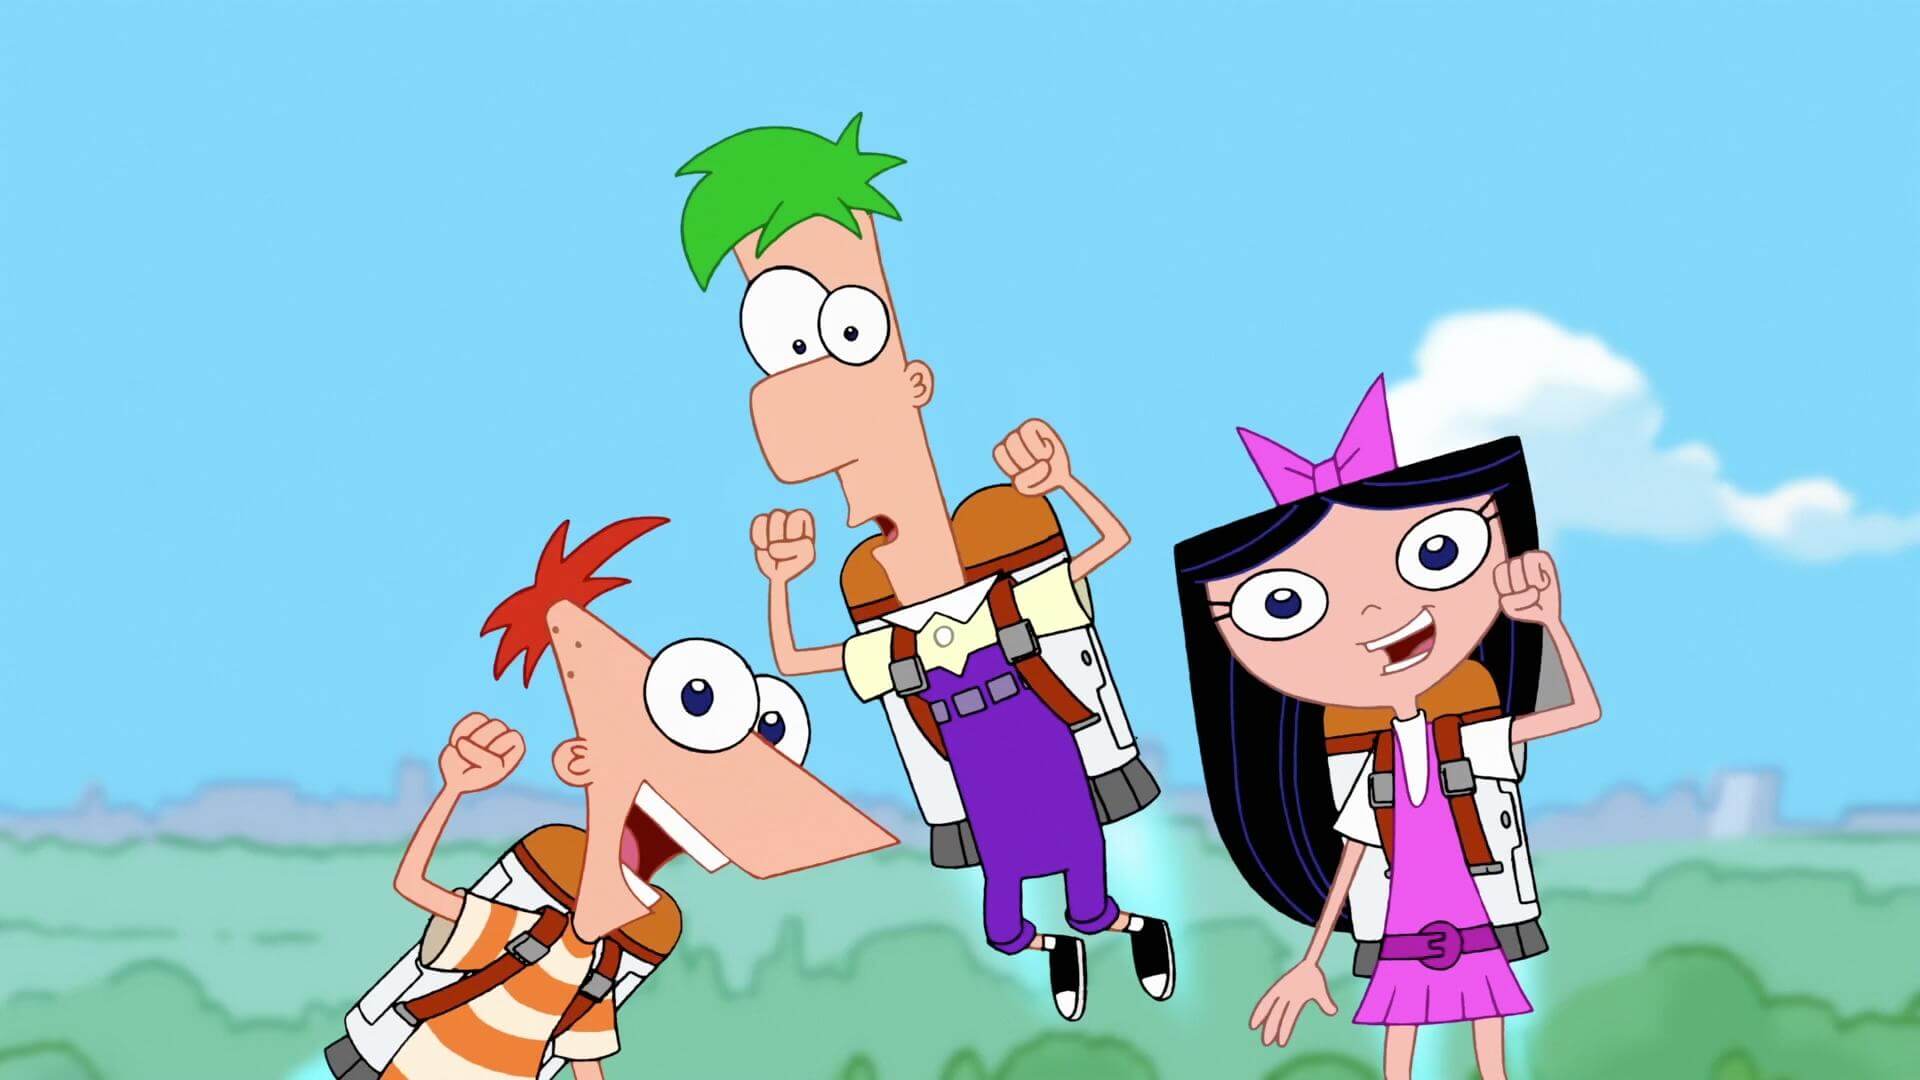 Phineas and ferb wallpaper.